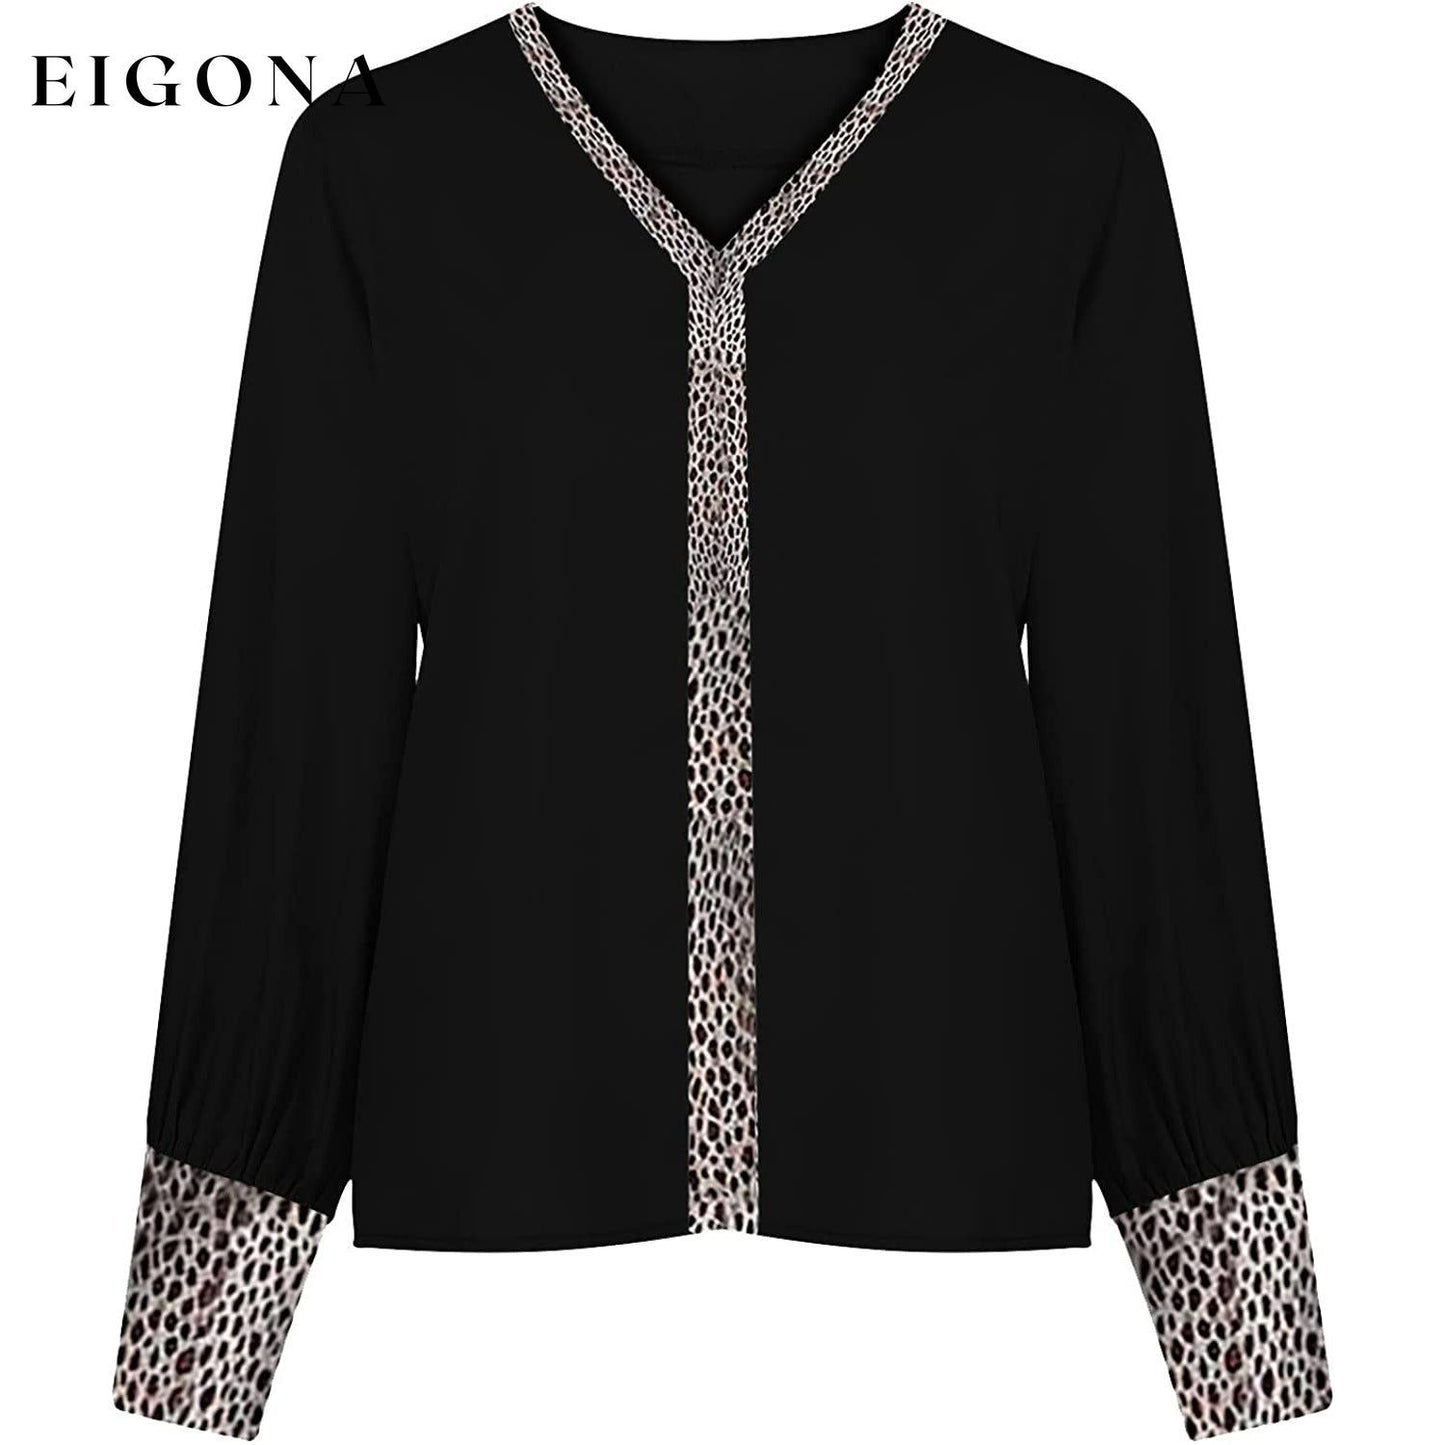 Women's Sexy Leopard Print Shirt Black __stock:200 clothes refund_fee:800 tops